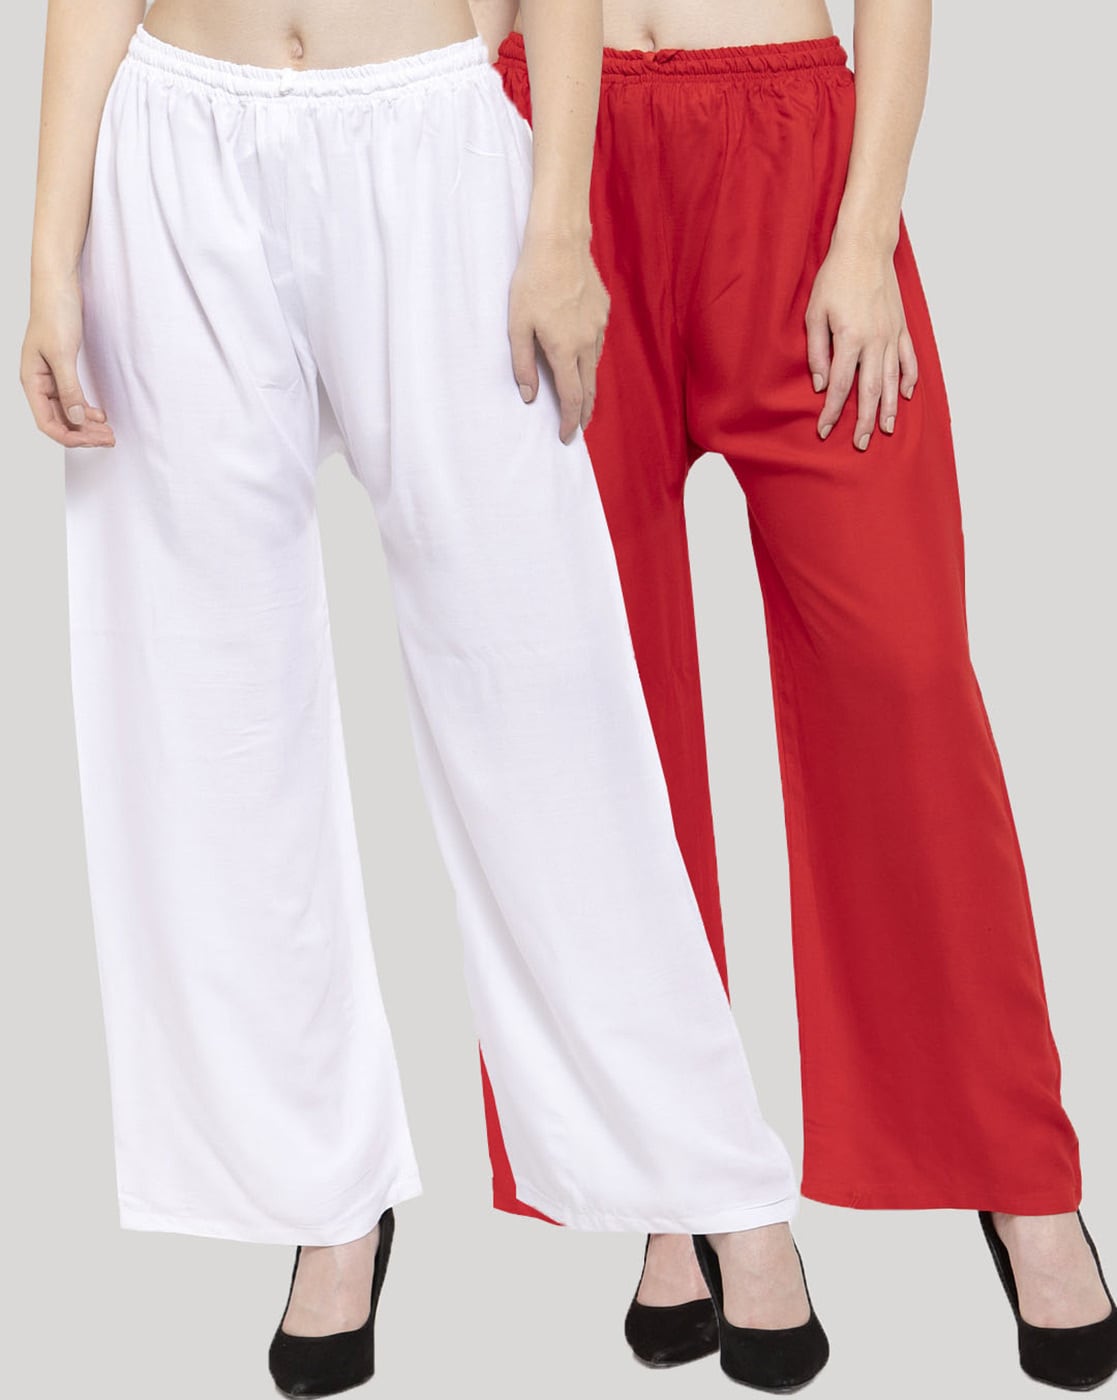 Buy Fflirtygo Women Palazzo Pants Cotton Combo Pack, Night Pyjamas for  Women, Lounge Wear, Full Palazzo For Women Cotton Night Pant �Soft Cotton  Night Wear (Assorted Pack Prints and Color May Vary)